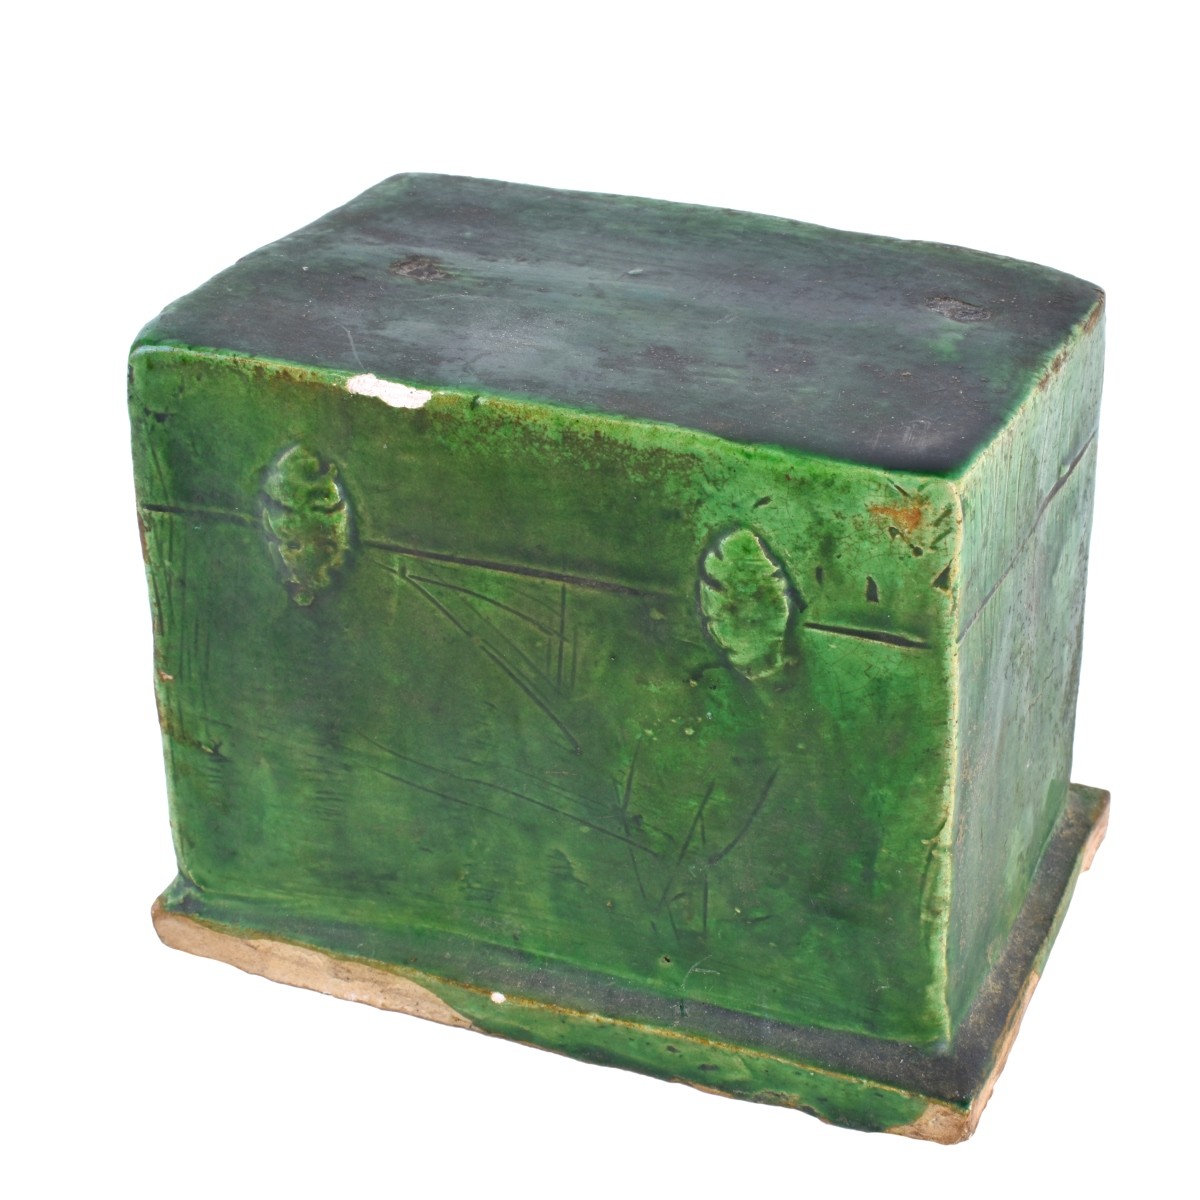 Pair of Antique Green Glazed Funerary Chest Models